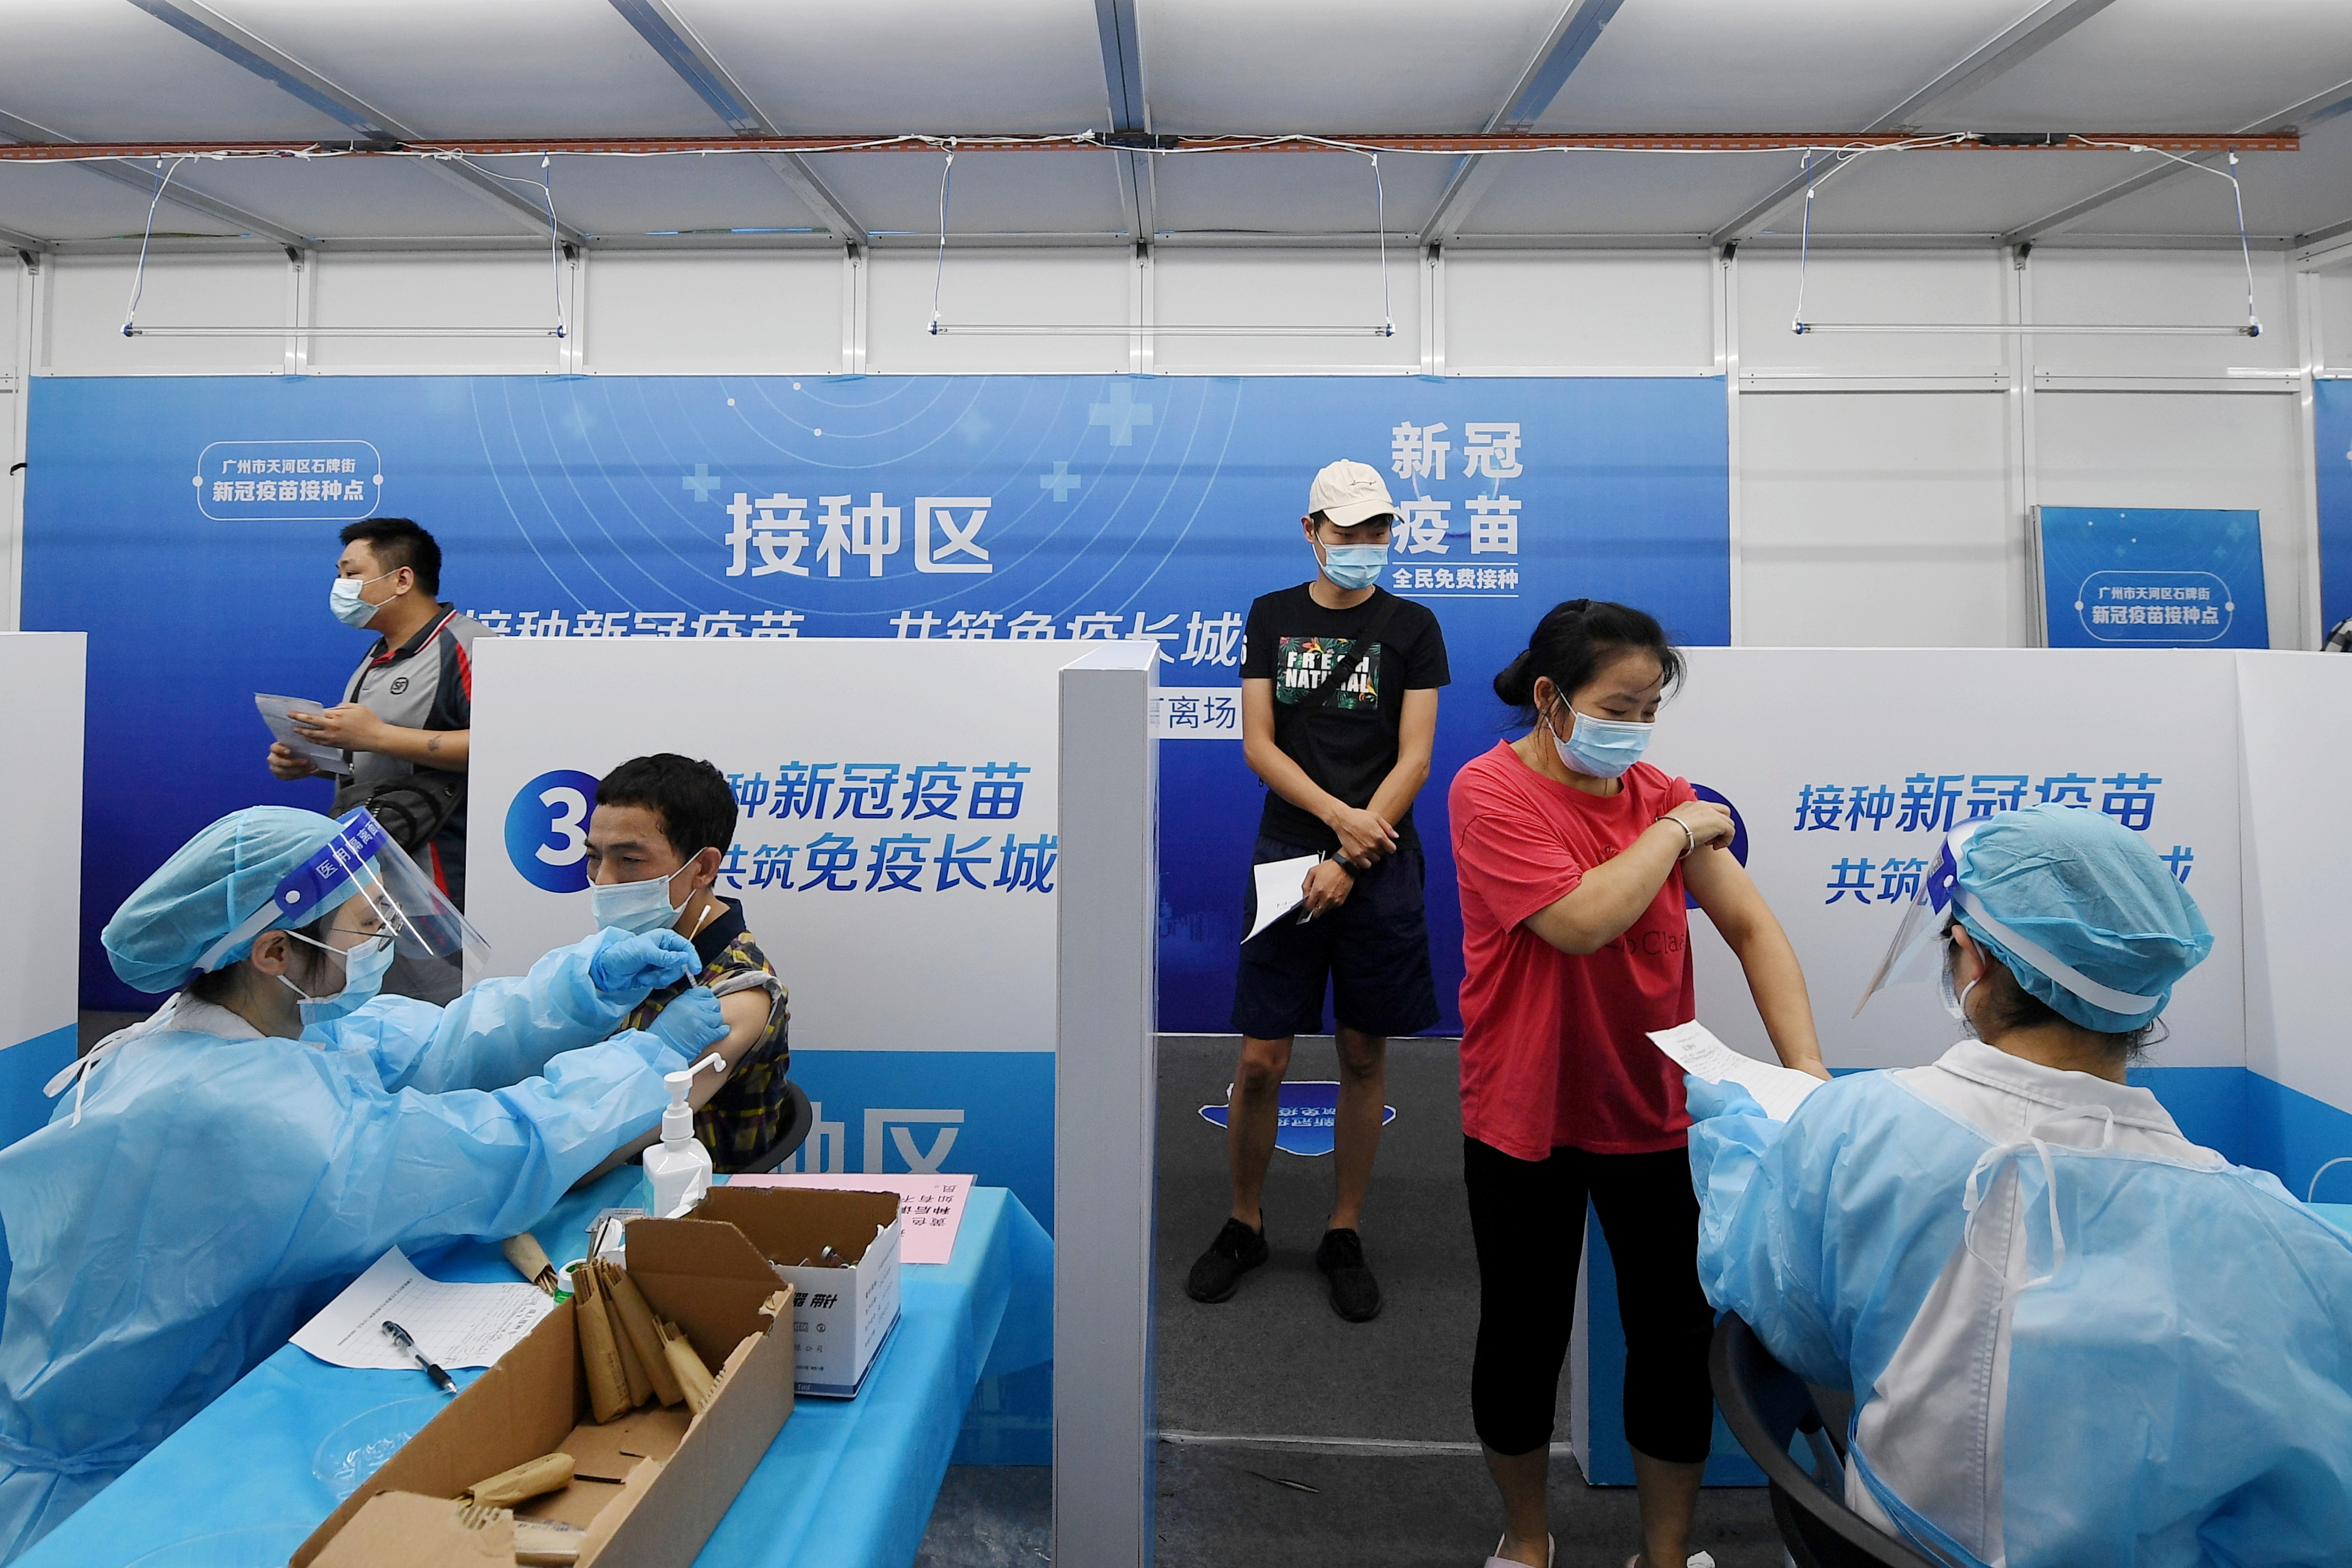 Residents receive vaccines against the coronavirus disease (COVID-19) at a makeshift vaccination site in Guangzhou, Guangdong province, China June 21, 2021. Picture taken June 21, 2021. cnsphoto via REUTERS